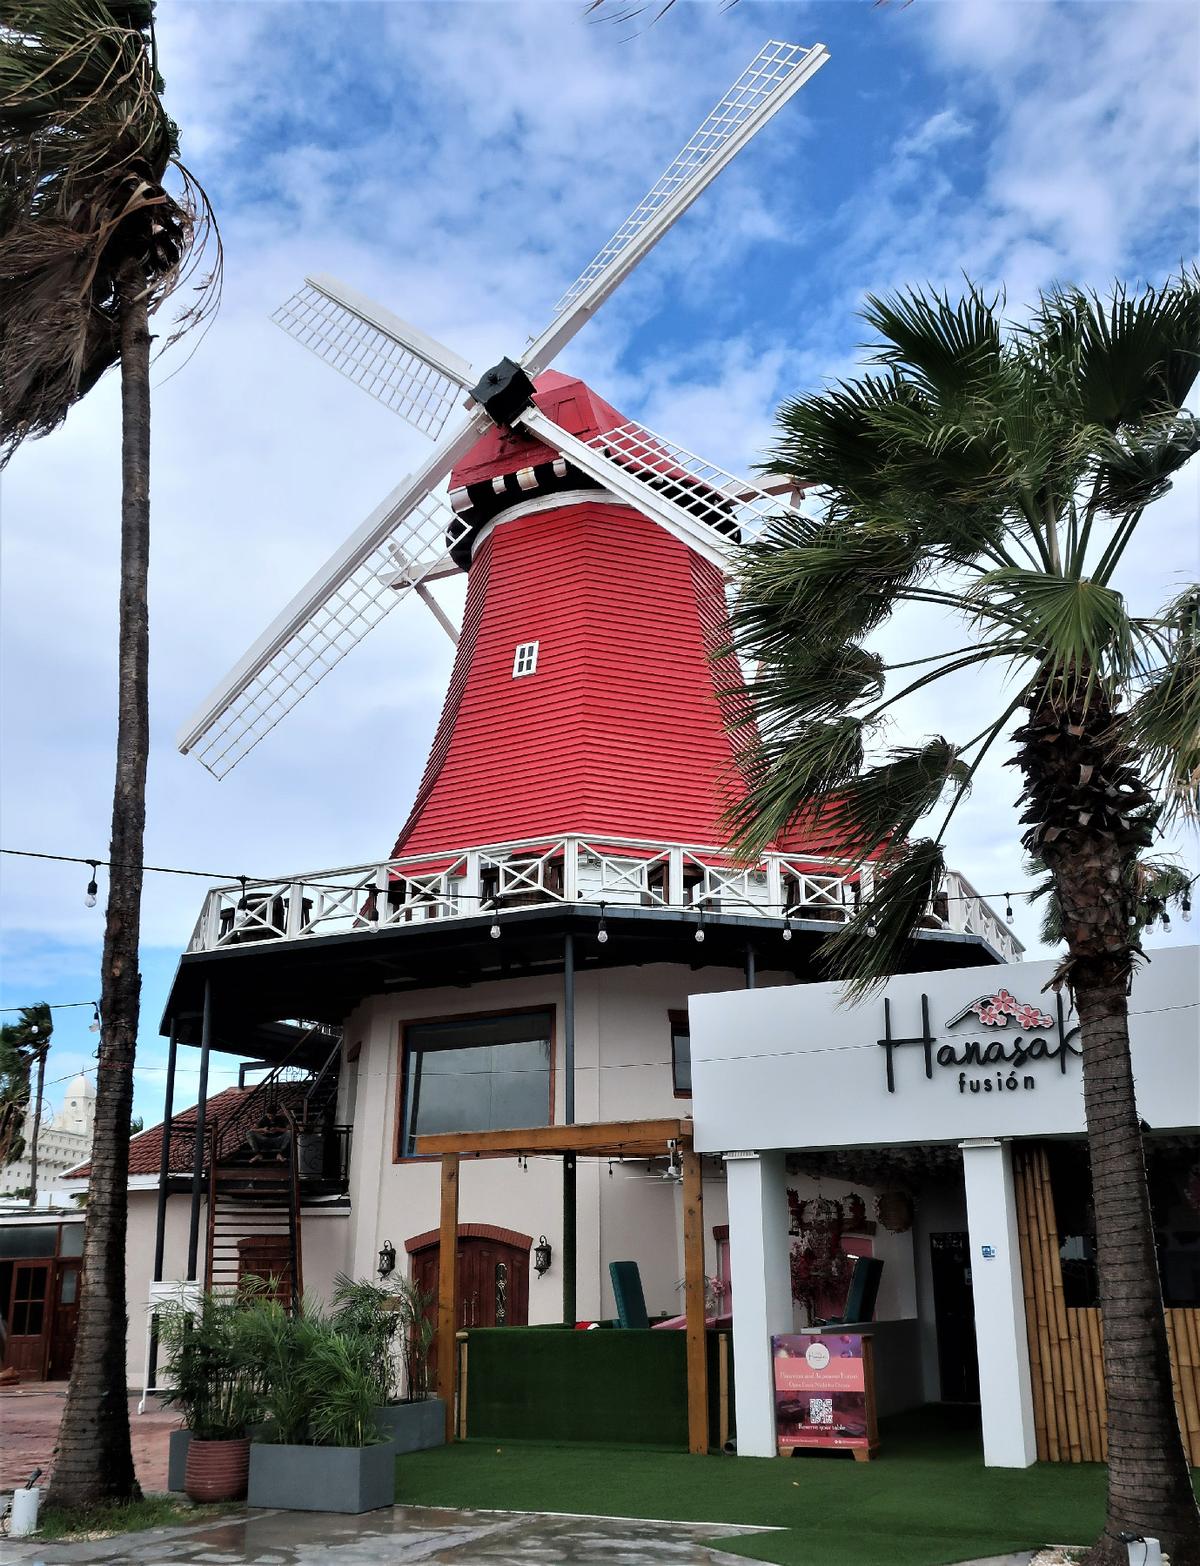 The Old Windmill in Aruba was first built in the Netherlands, then taken apart and reassembled in Aruba. (Photo courtesy of Victor Block)